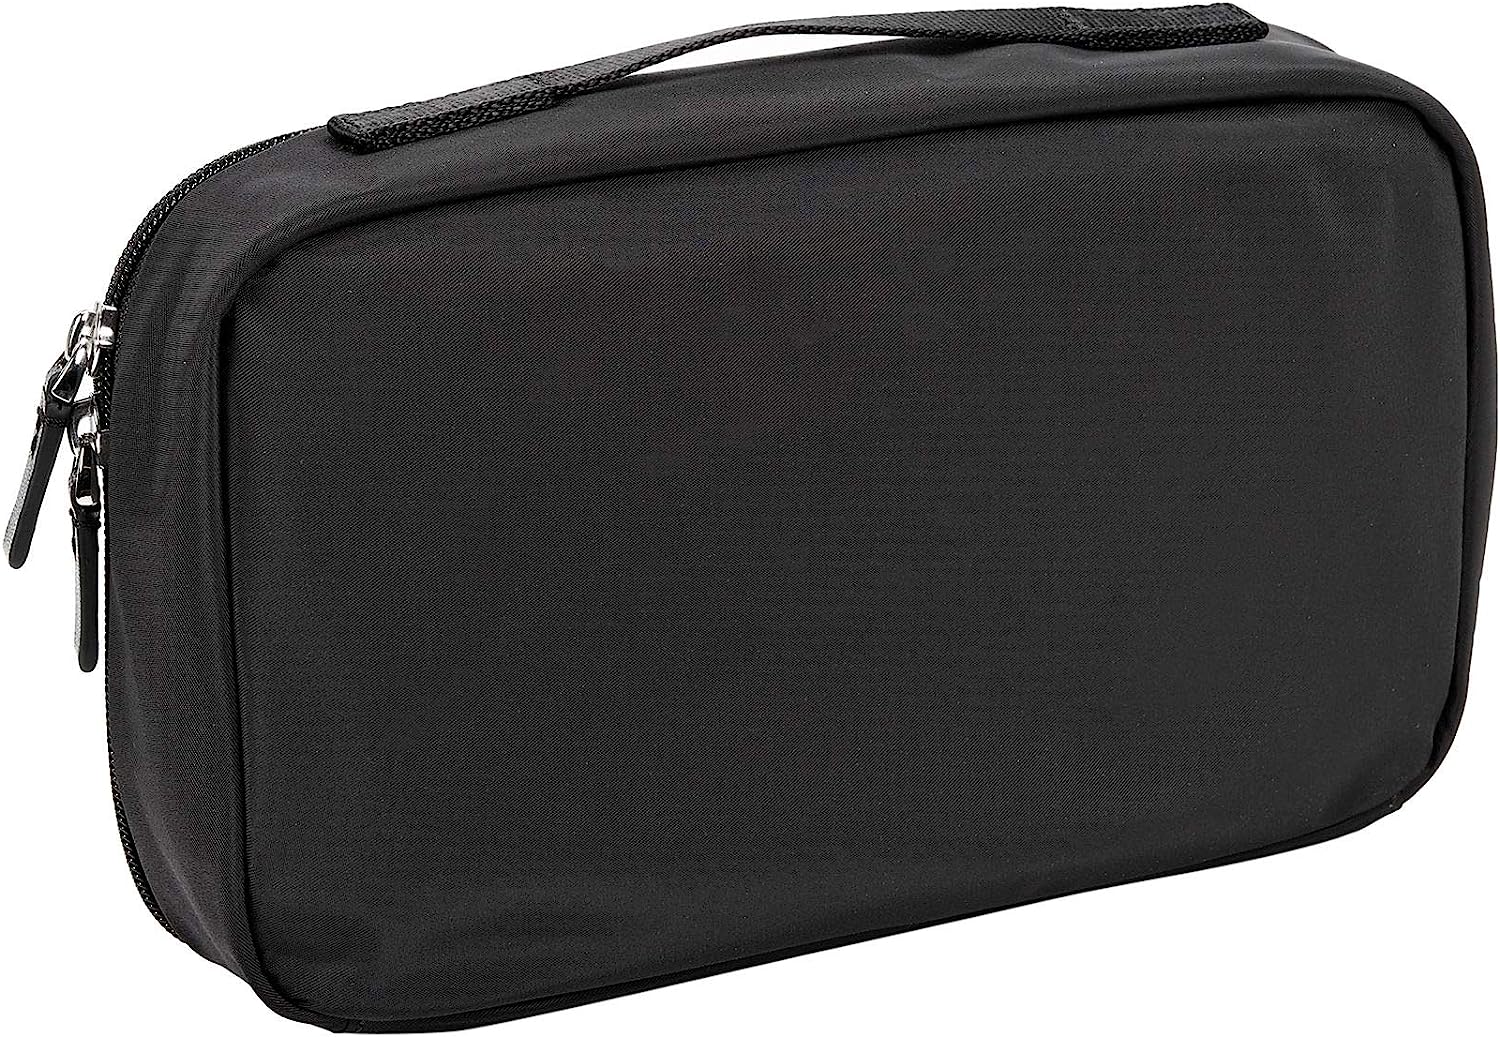 TUMI - Travel Accessories Small Packing Cube - Luggage Packable Organizer Cubes - Black Packing Cube Black - image 4 of 5